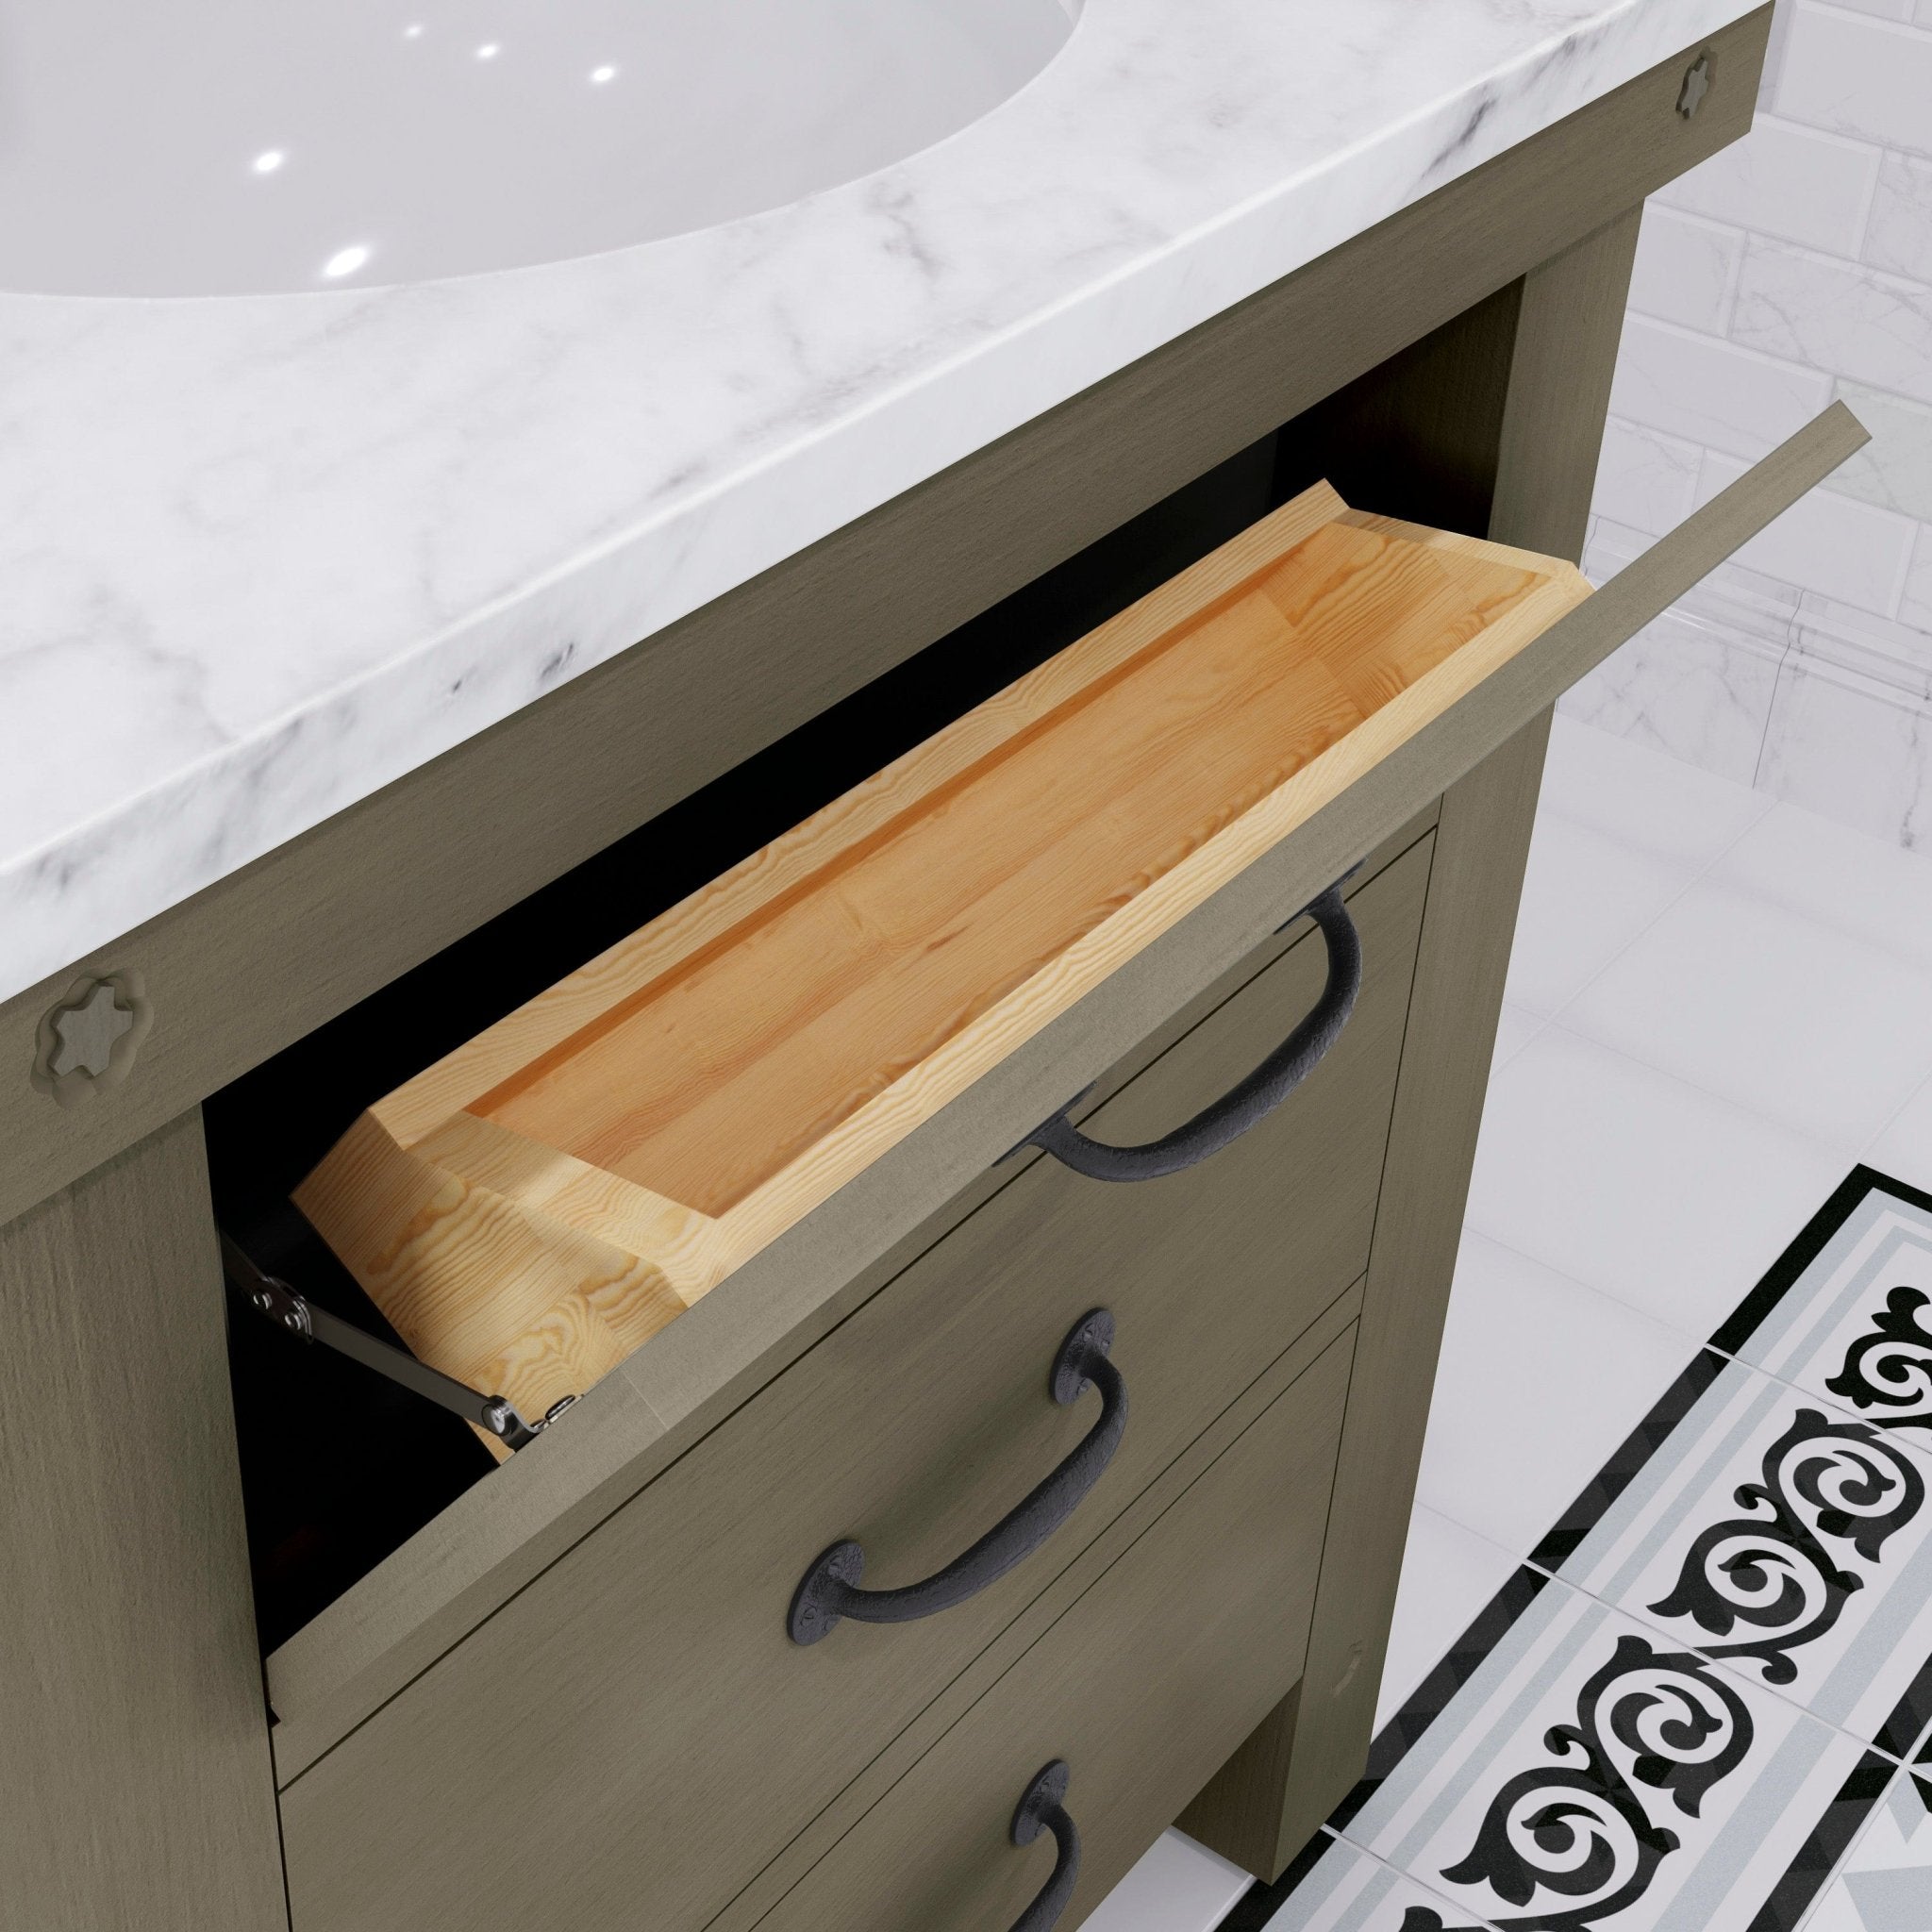 30 Inch Grizzle Grey Single Sink Bathroom Vanity With Carrara White Marble Counter Top From The ABERDEEN Collection - Molaix601946608505Bathroom VanitiesAB30CW03GG-000000000